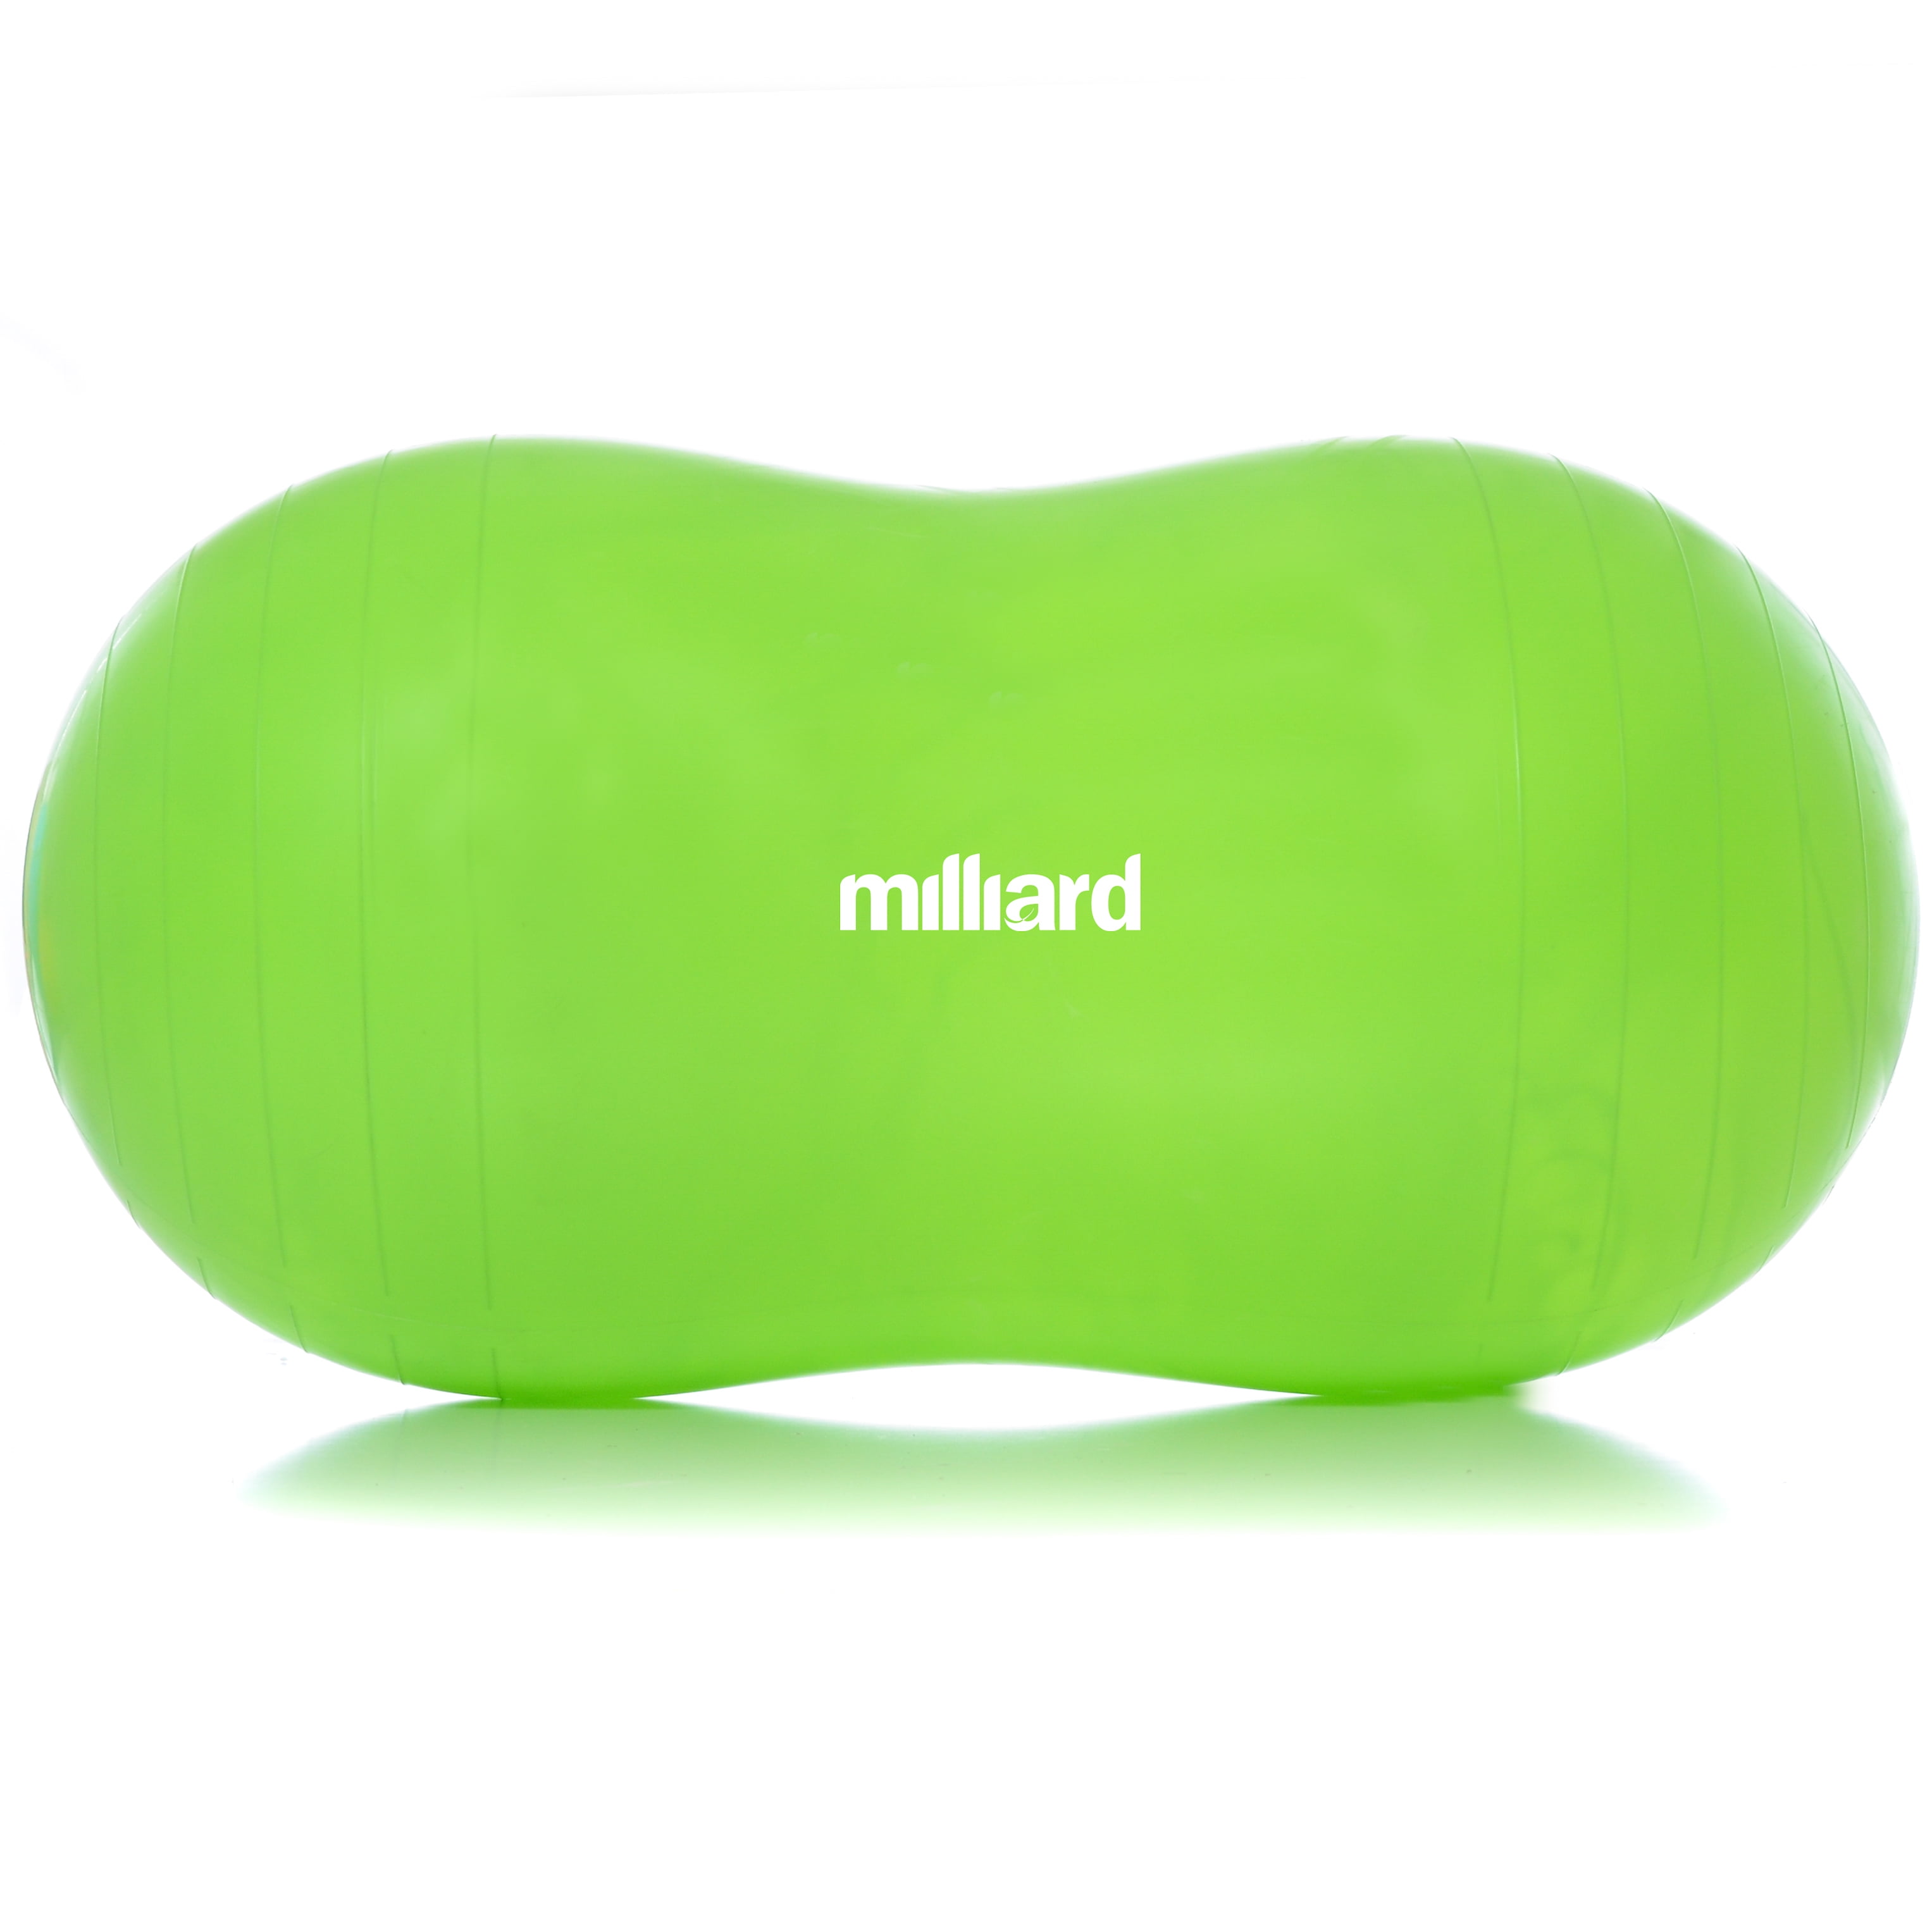 Milliard Peanut Ball Orange Approximately 23x12 60x30cm Physio Roll for Therapy, 